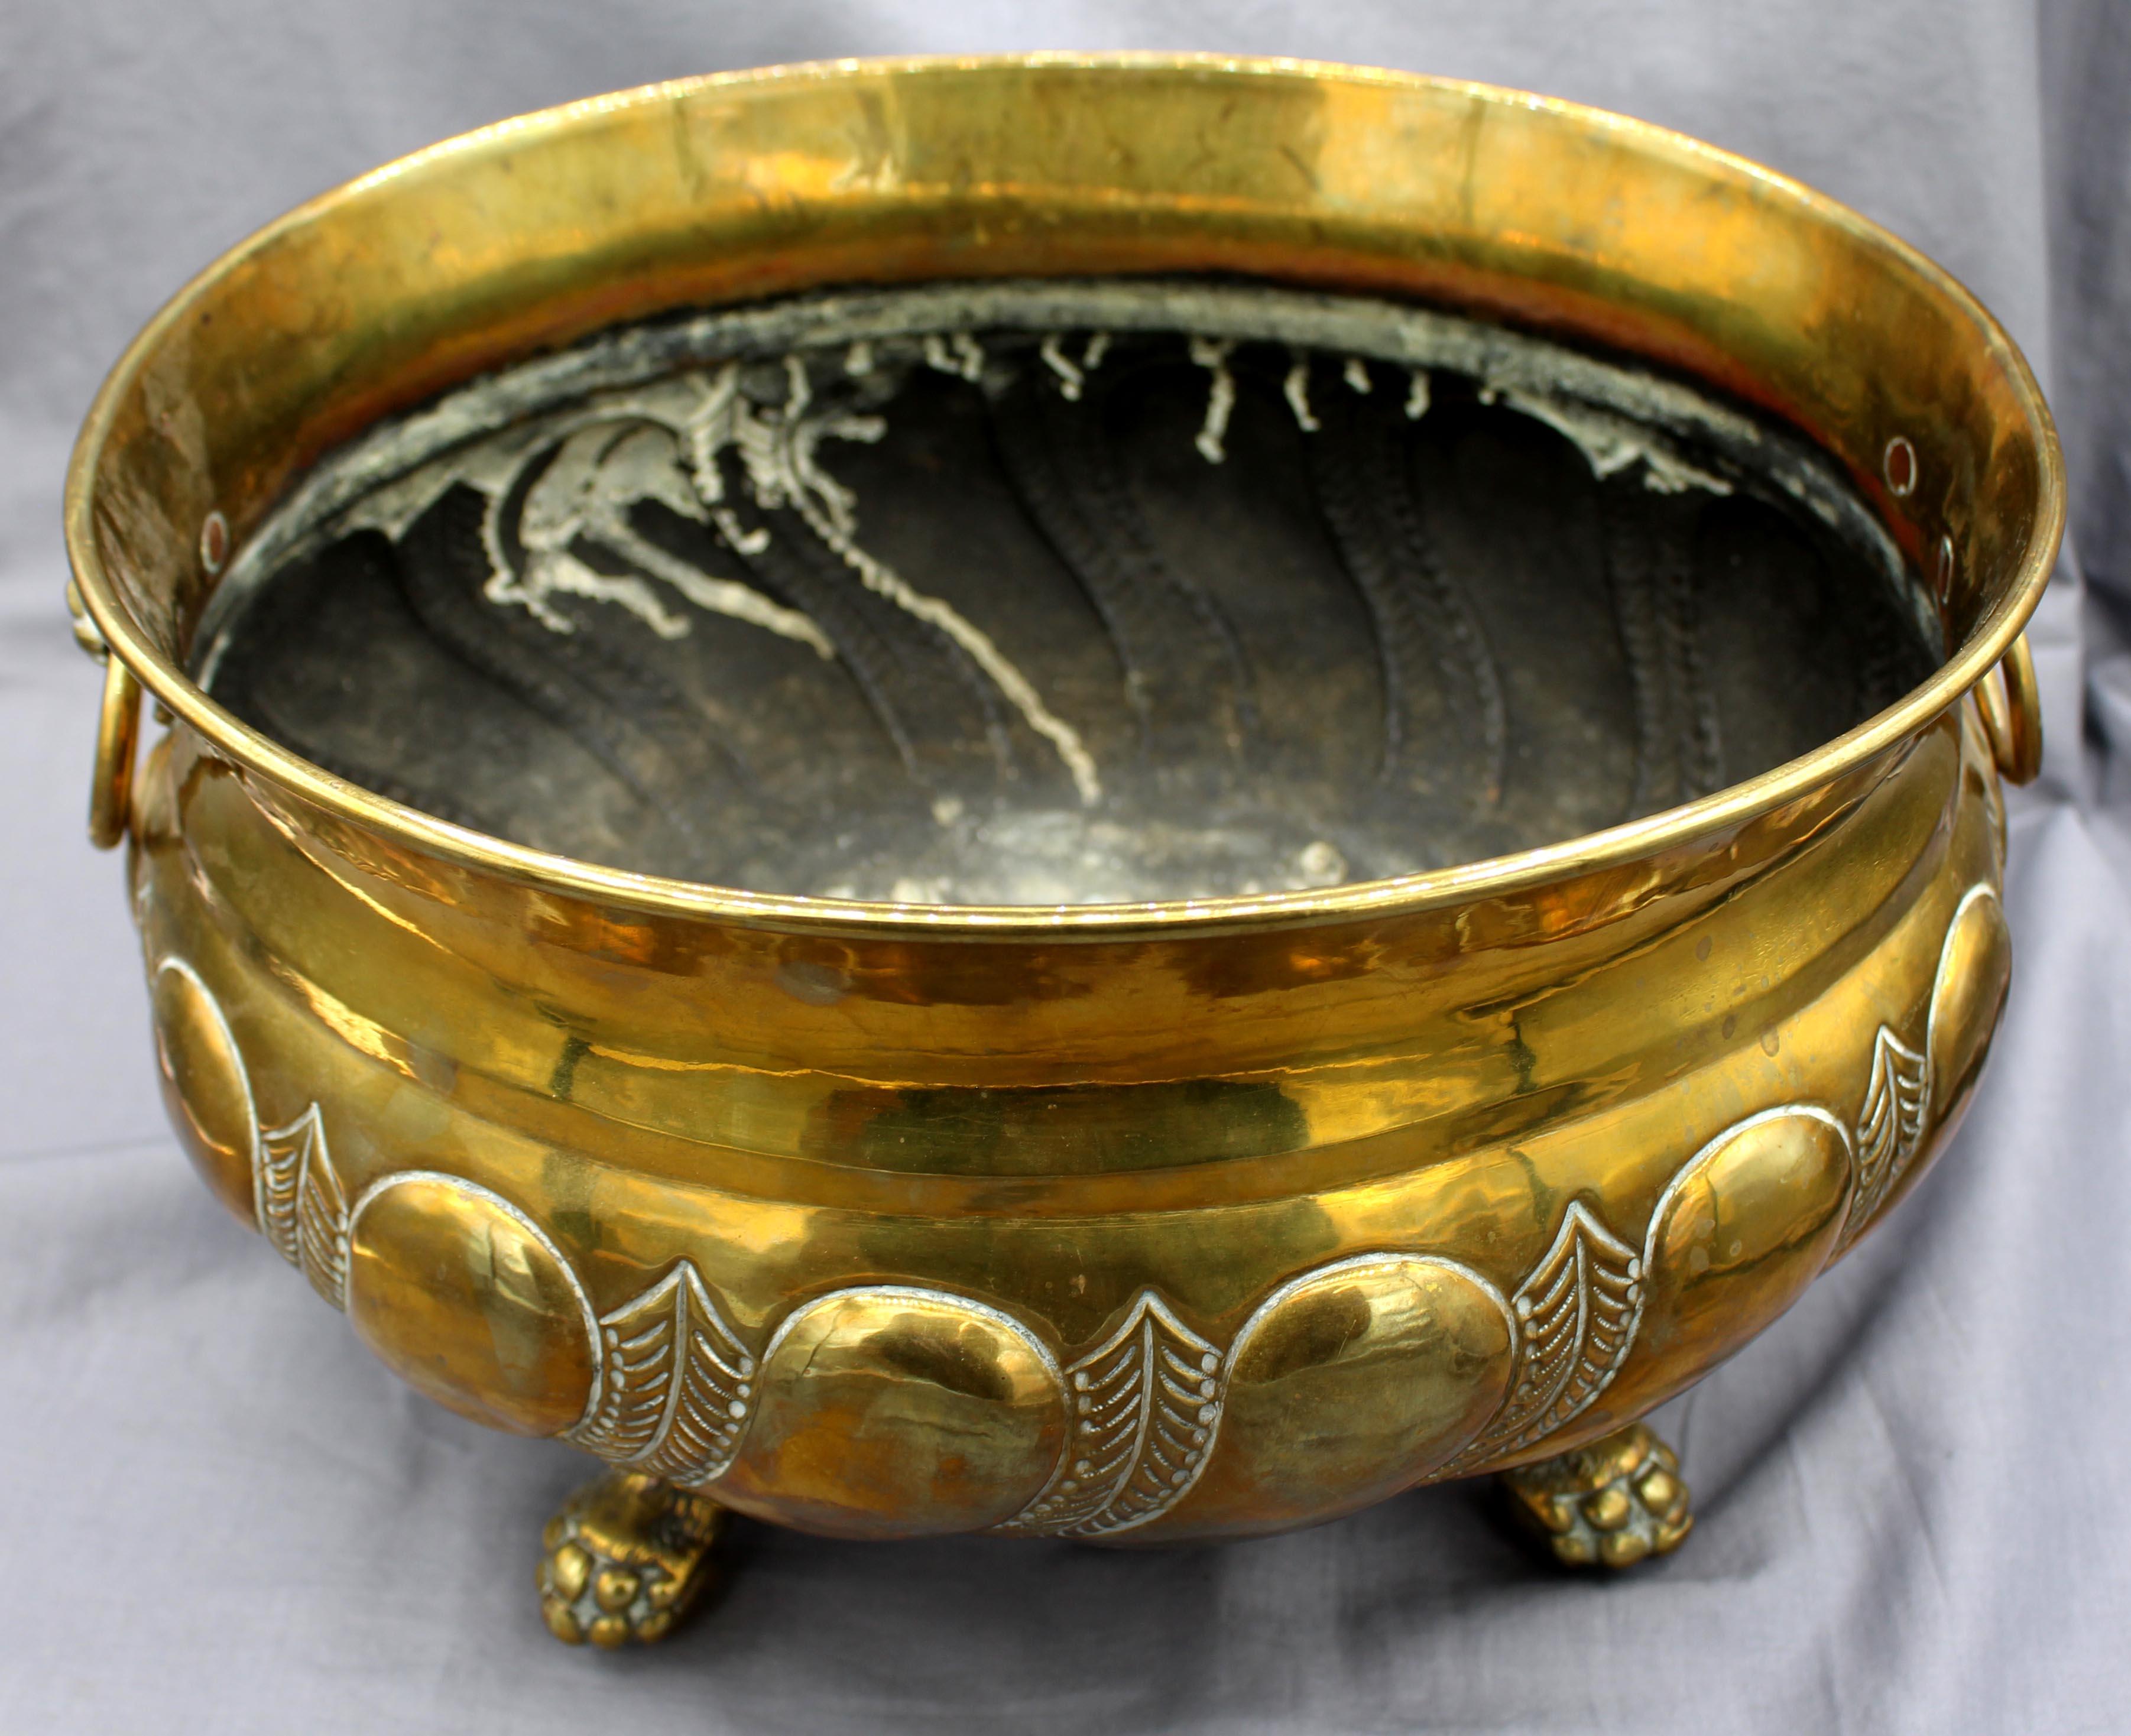 English circa 1900 oval brass jardiniere. Bold gadrooning & feather decoration, raised on finely detailed lion's paw feet with lion's mask ring handles.
13.5